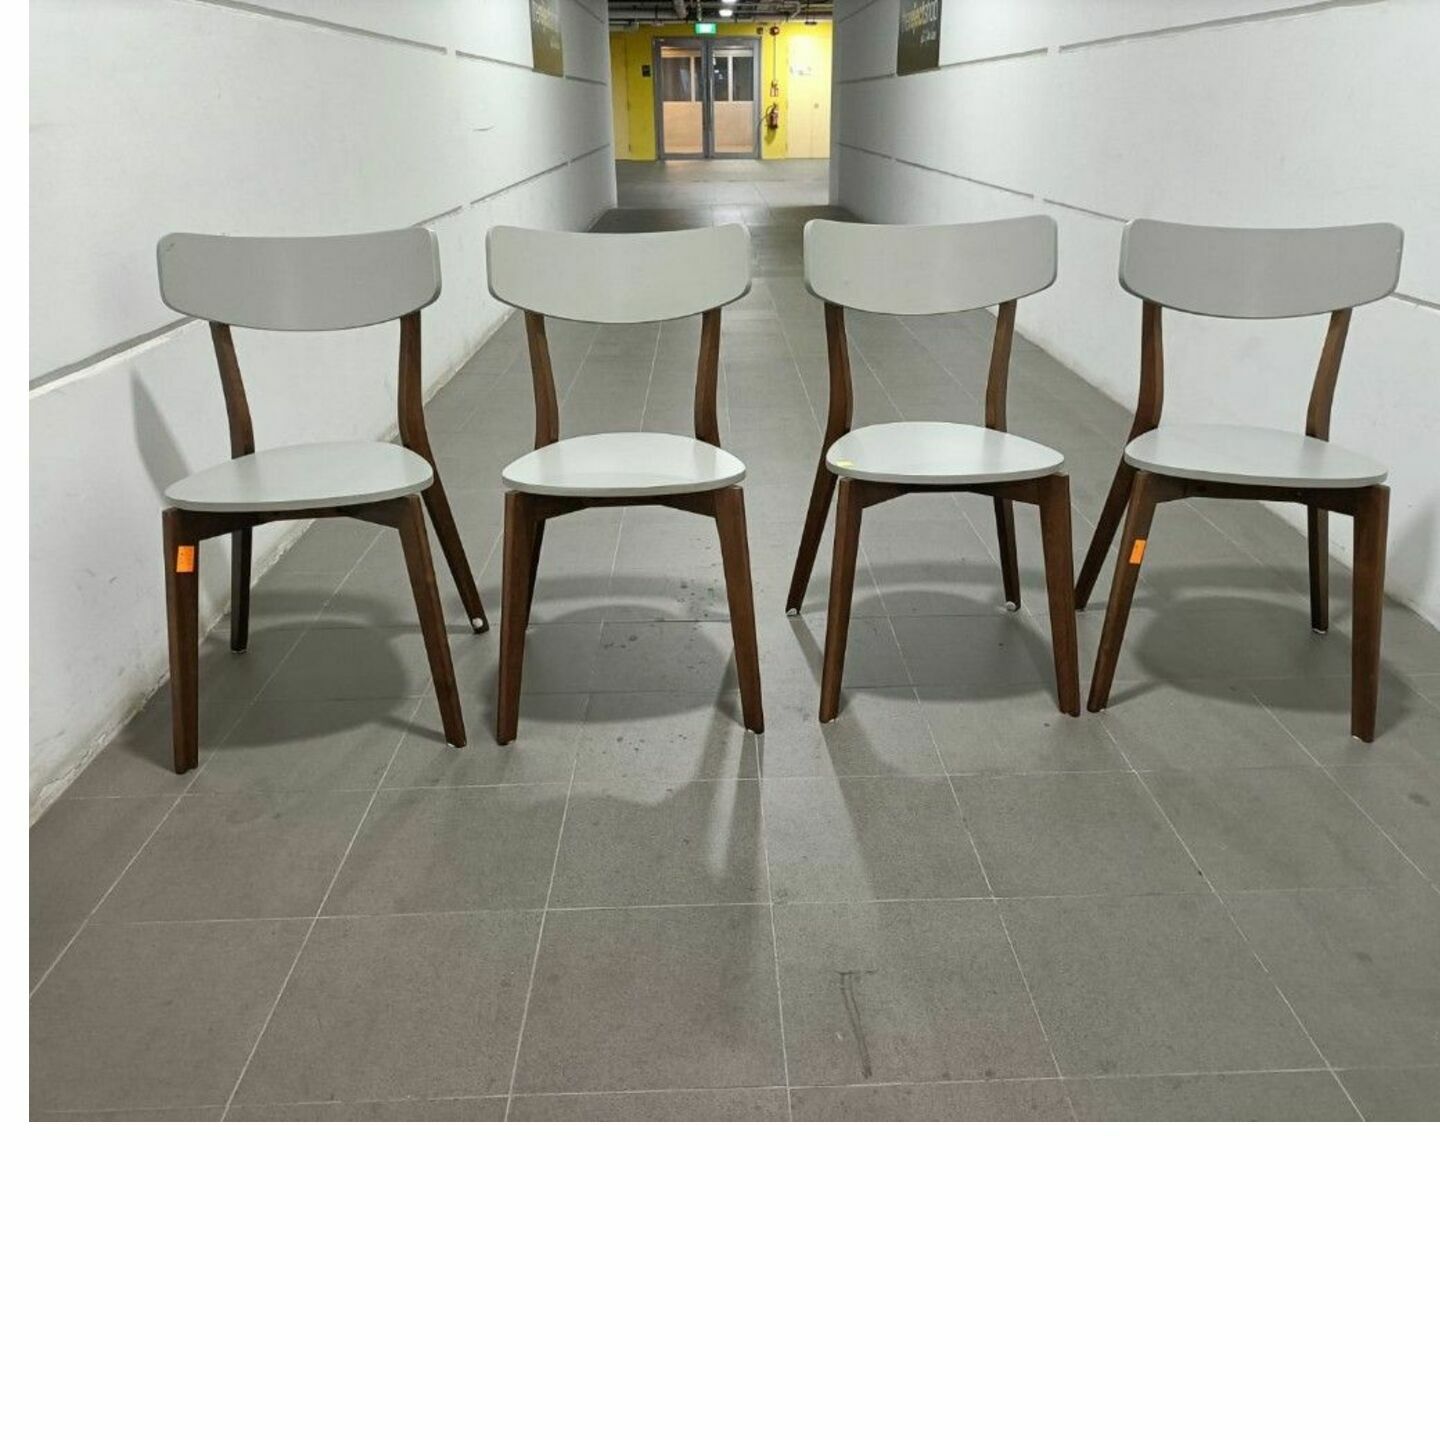 4 x JANG Dining Chairs in GREY